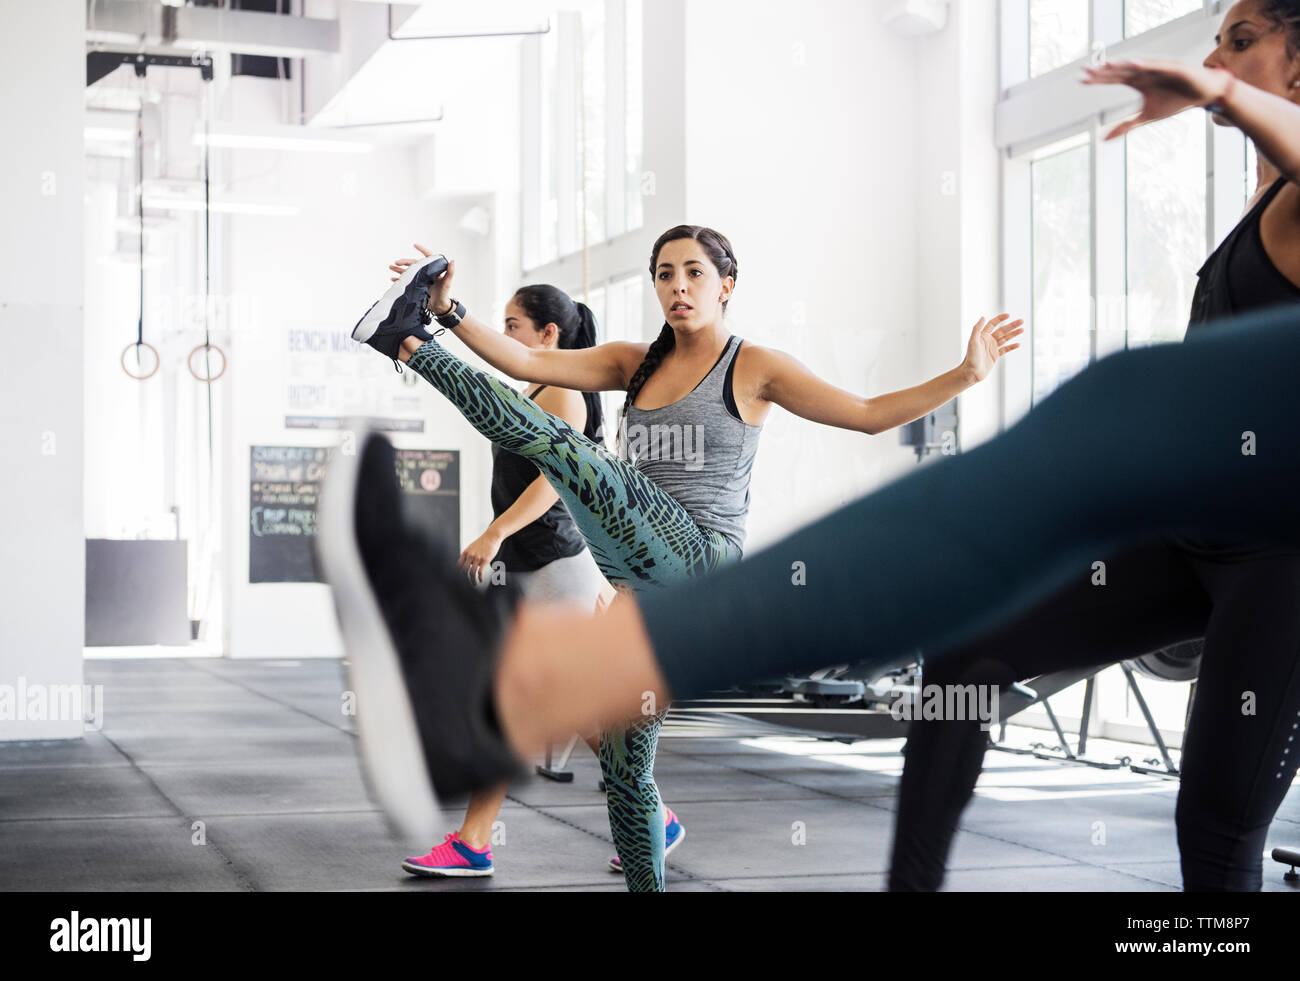 Female athletes stretching legs while exercising in crossfit gym Stock Photo